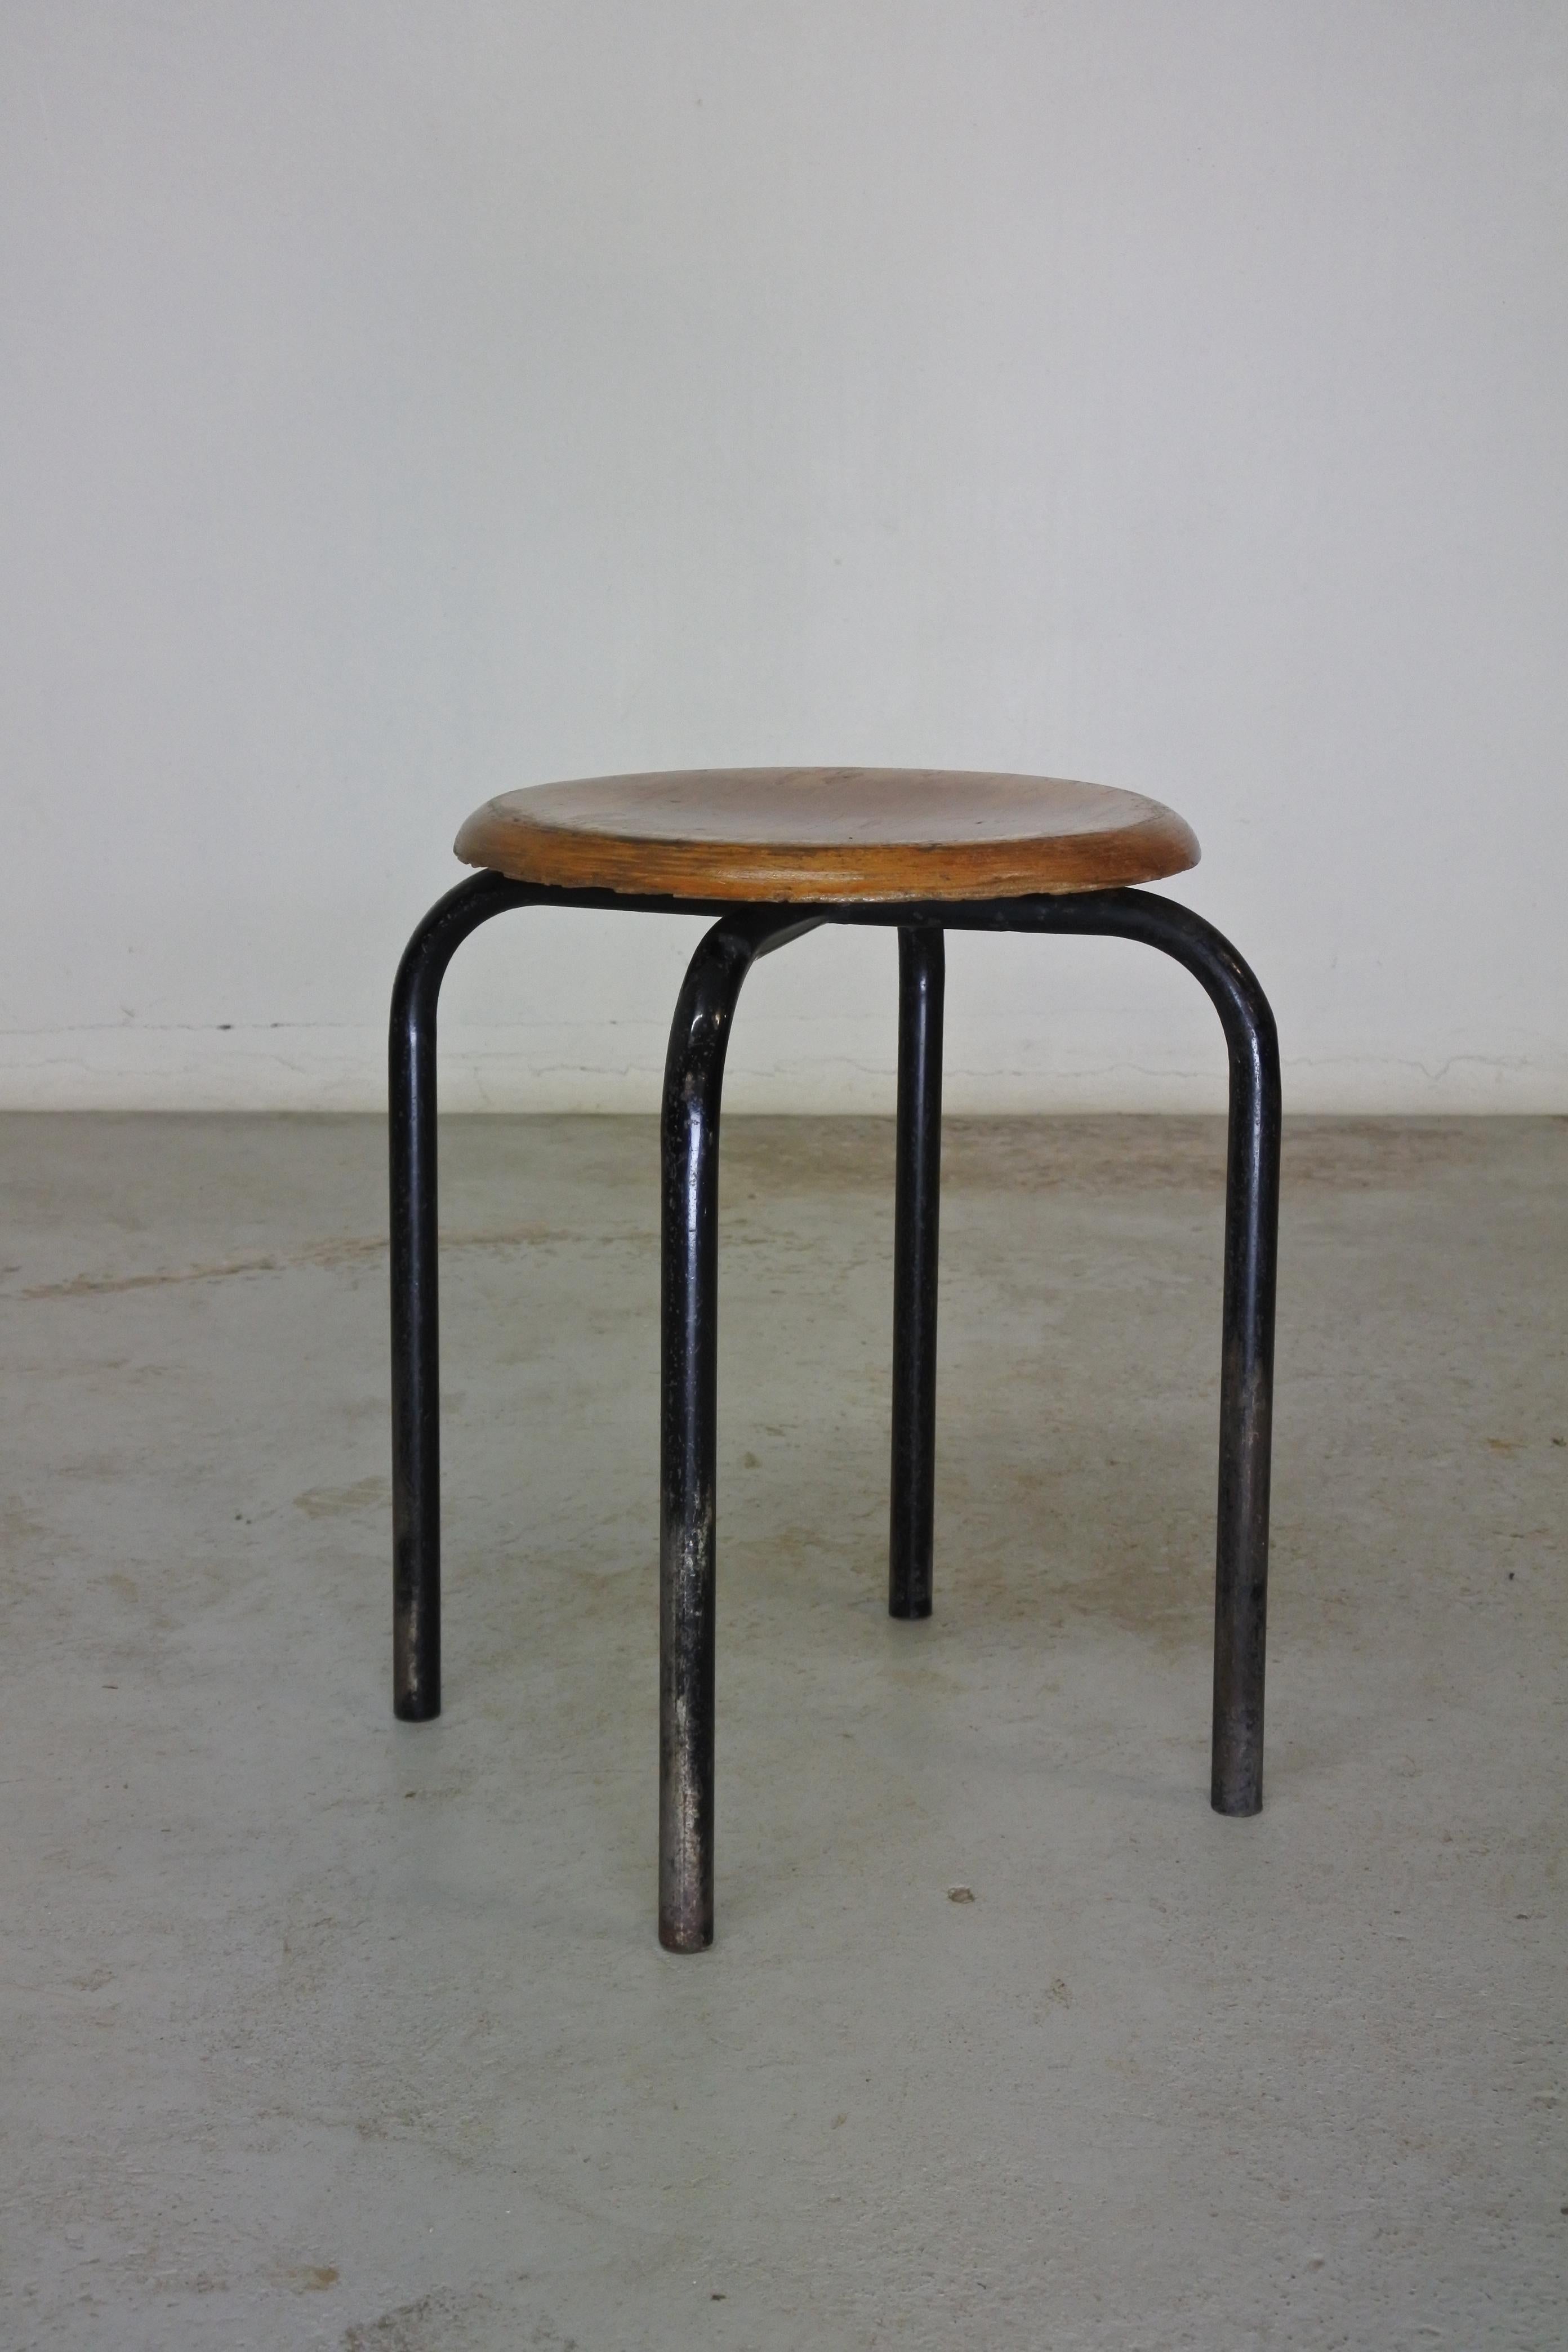 Four legged stool attributed to Atelier Jean Prouve
Lacquered metal base and moulded plywood seat.
Heavy patina.